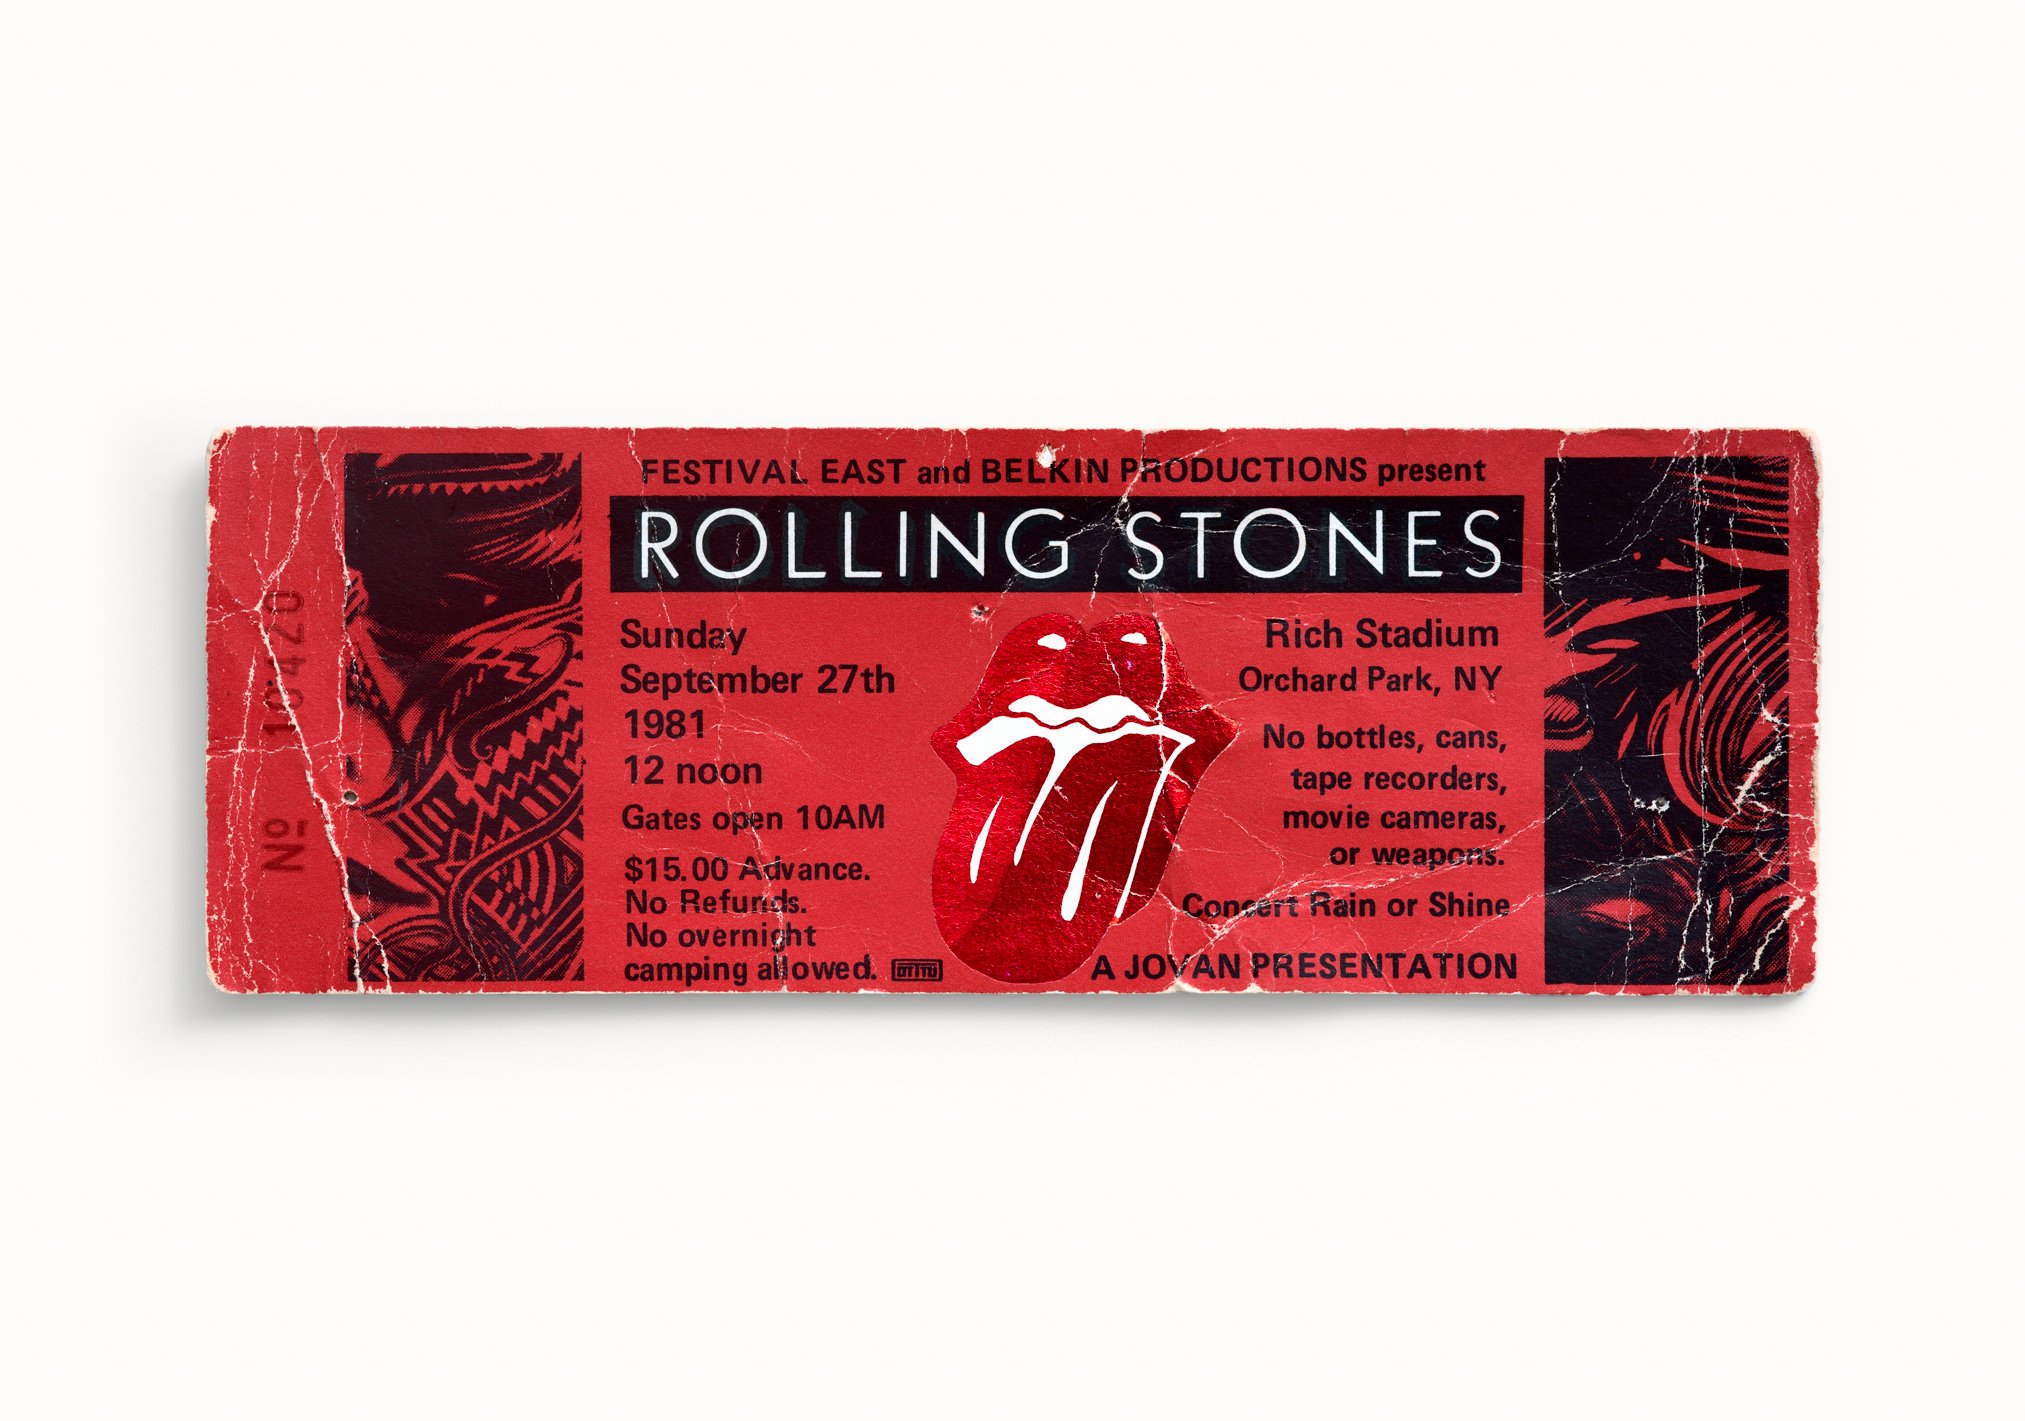 The Rolling Stones, Rich Stadium, Orchard Park, NY 1981